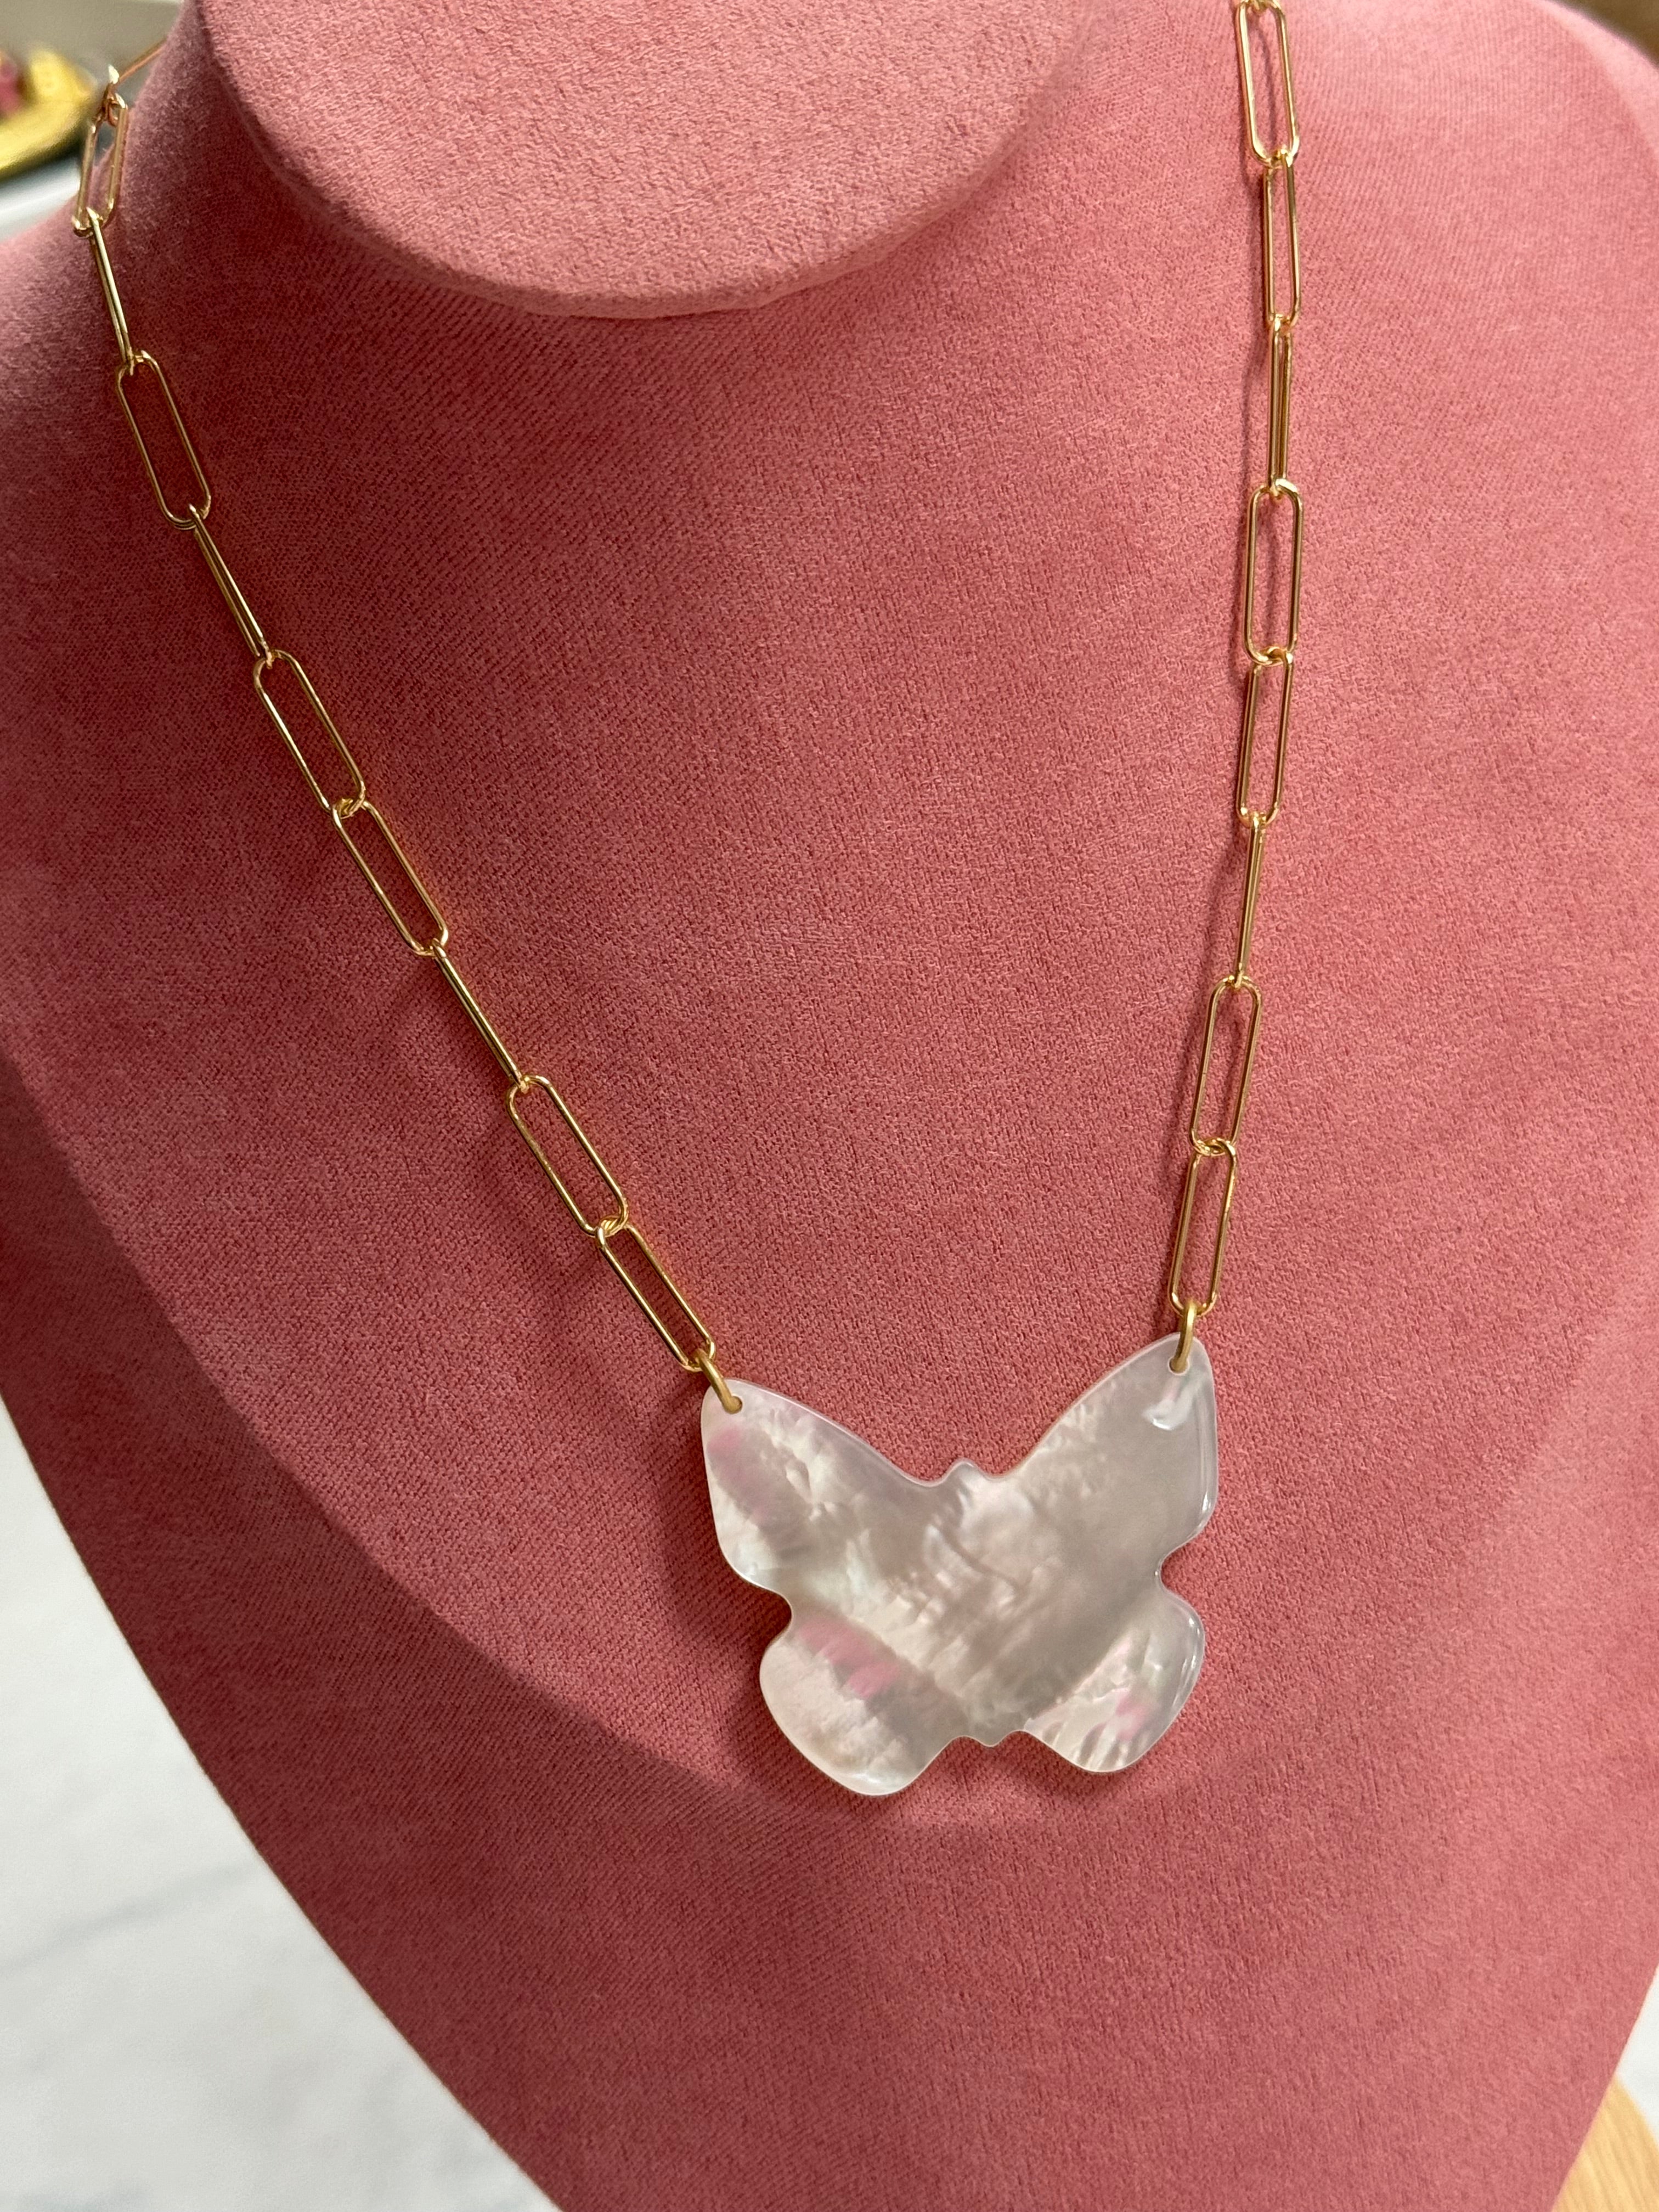 White Butterfly Necklace